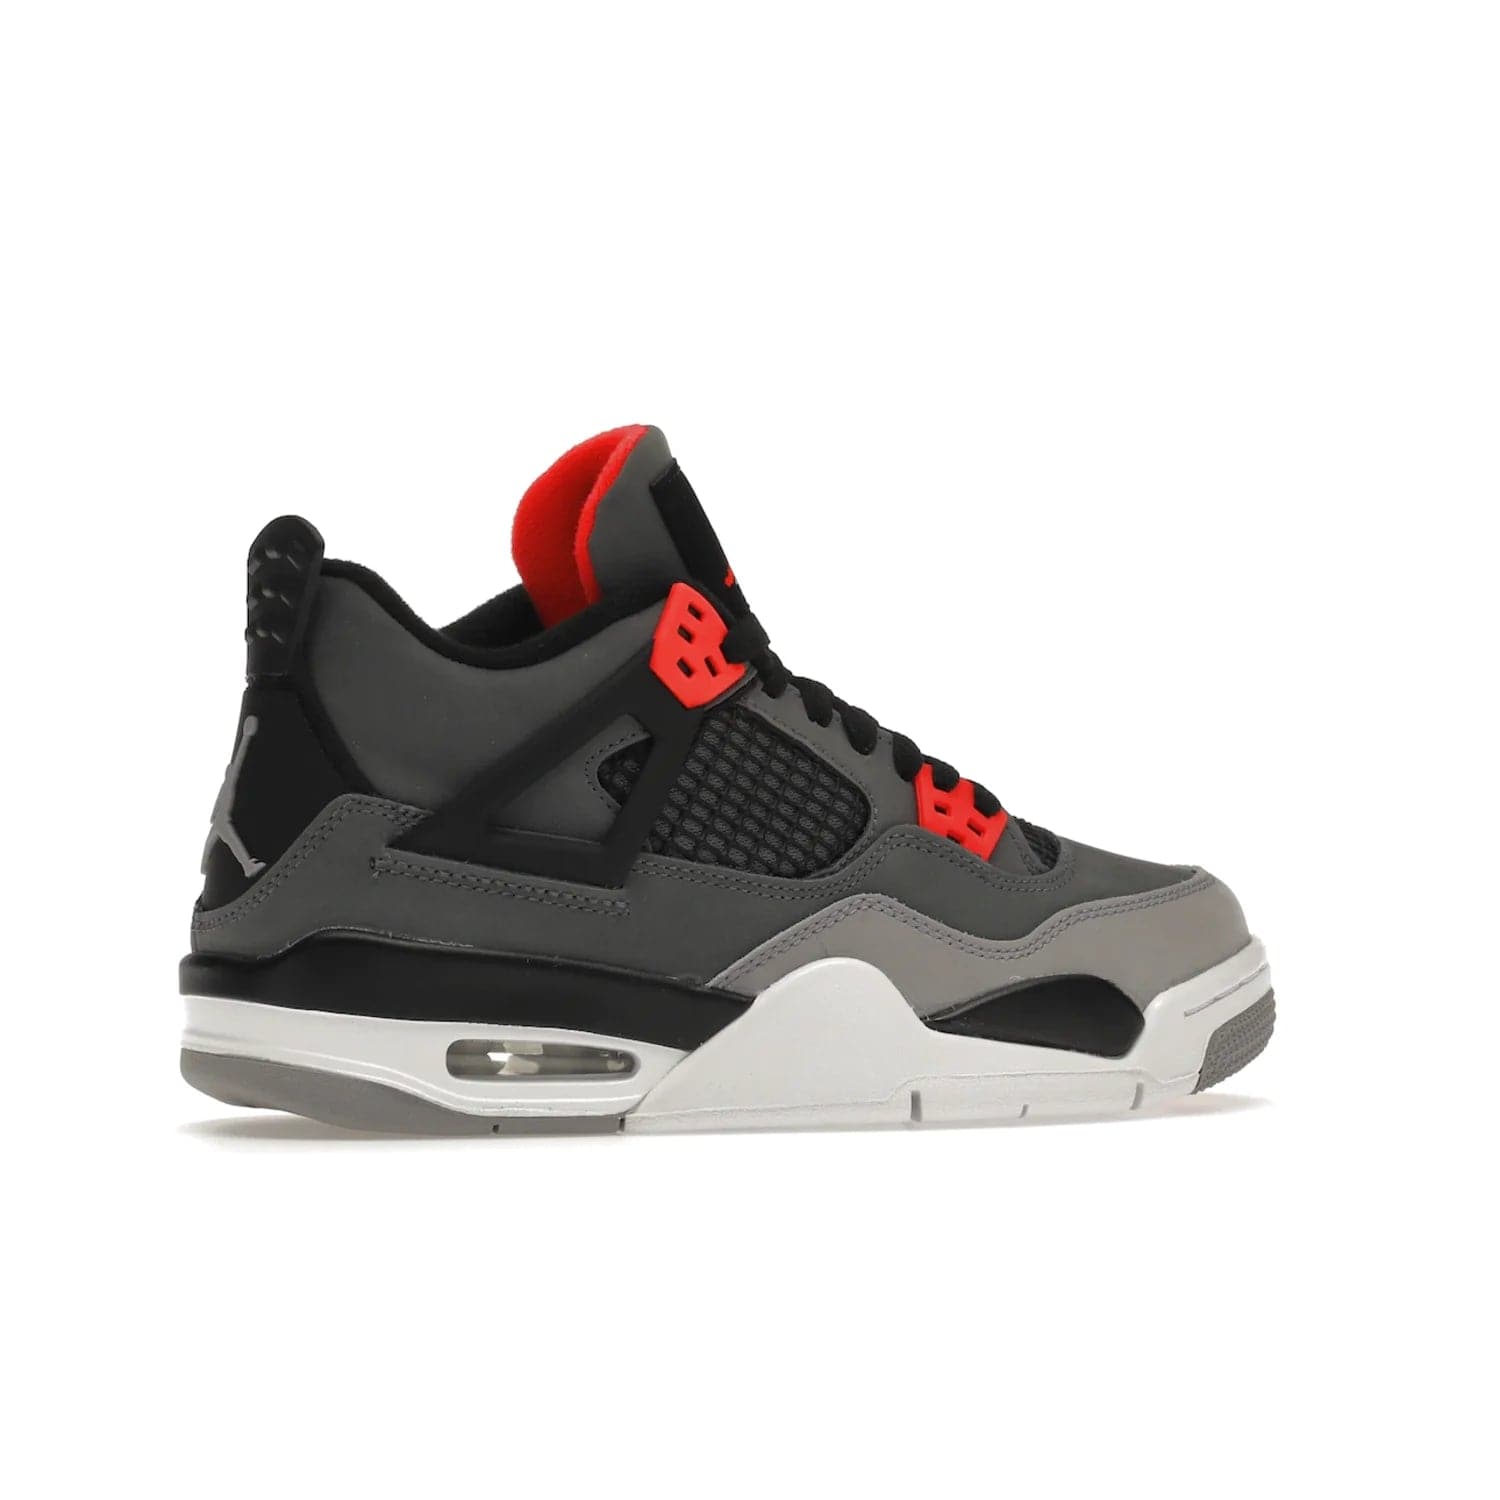 Jordan 4 Retro Infrared (GS) - Image 35 - Only at www.BallersClubKickz.com - Shop the Air Jordan 4 Retro Infrared (GS) for a classic silhouette with subtle yet bold features. Dark grey nubuck upper with lighter forefoot overlay, black accents, Infrared molded eyelets & woven tongue tag. Available June 2022.